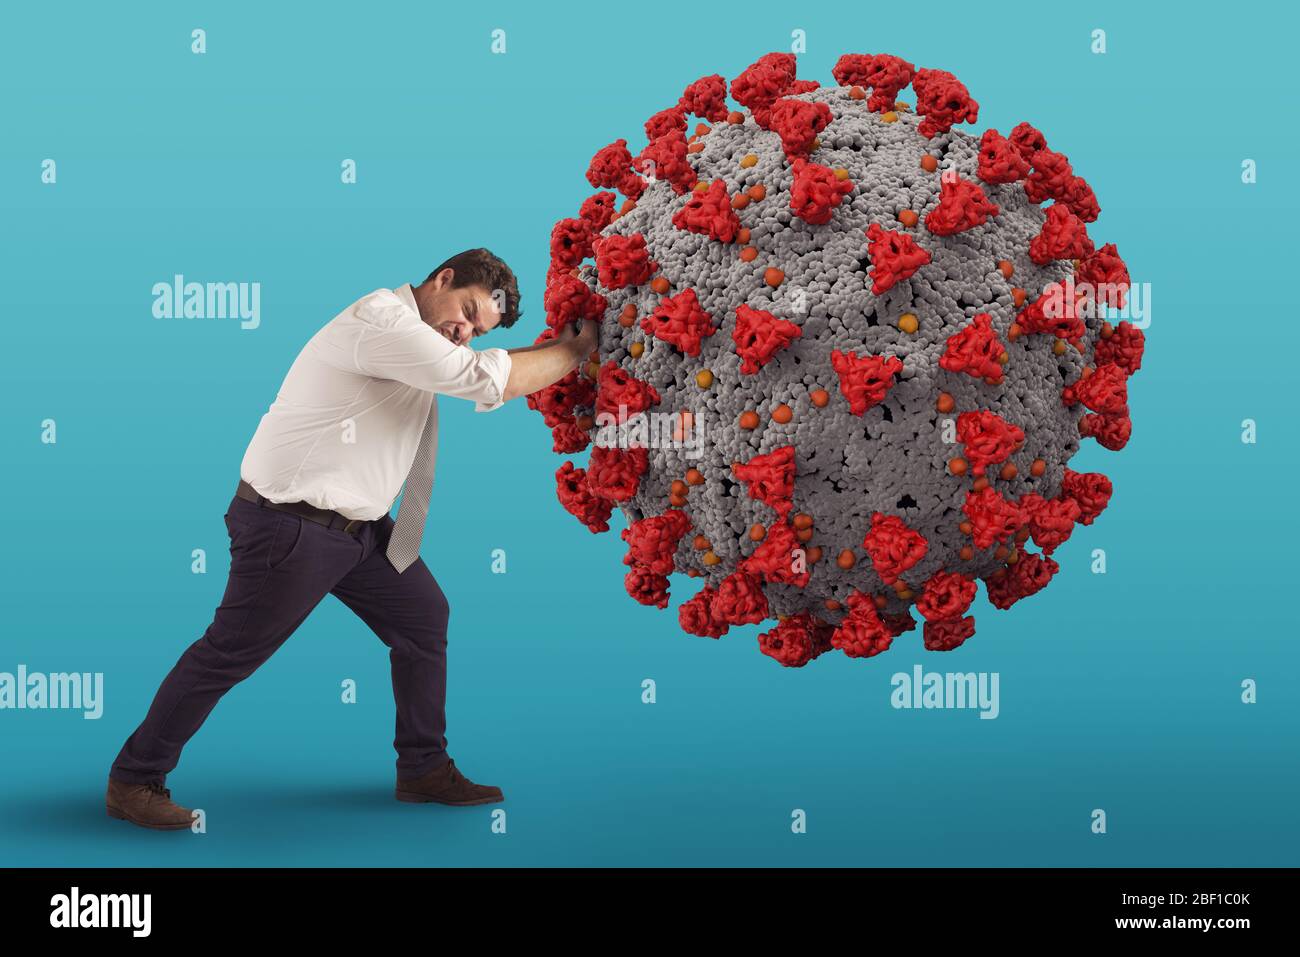 Big virus that oppresses and crushes people s finances and freedoms Stock Photo